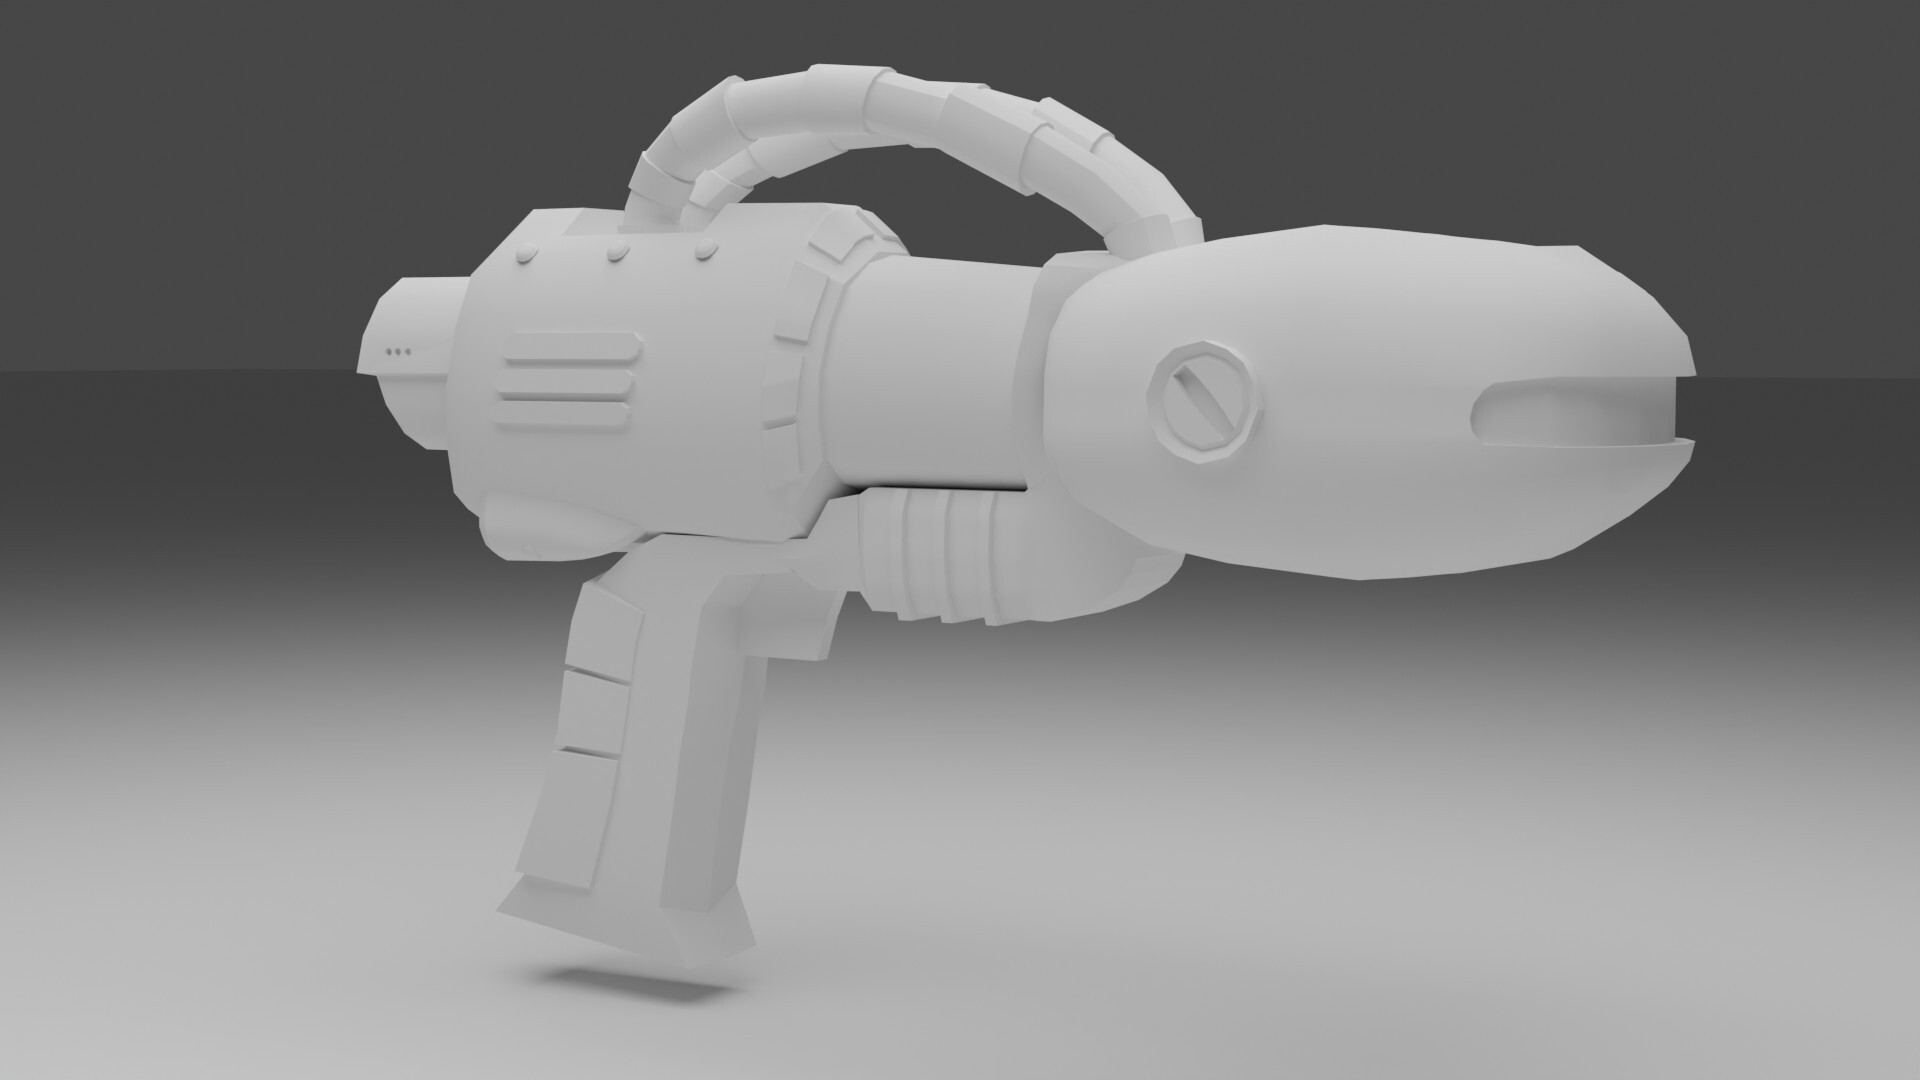 Games - Ratchet Clank Going Commando 4, GAMES_13028. 3D stl model for CNC